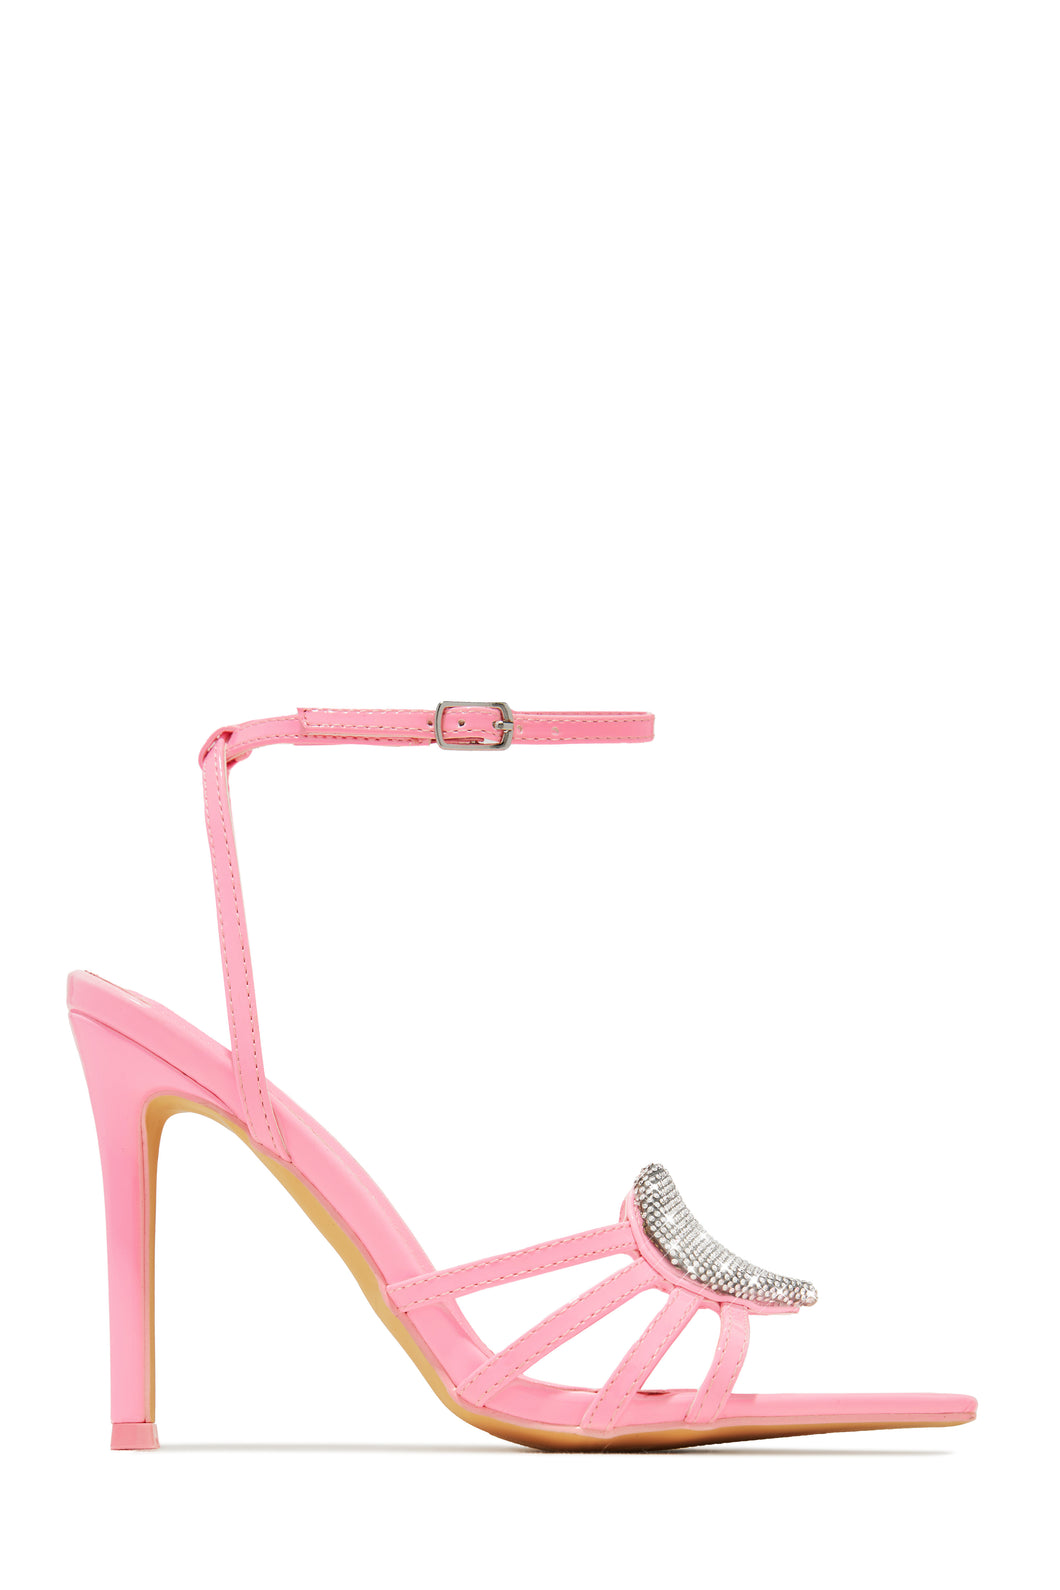 Pink Strappy Single Sole High Heels with Embellished Heart Detailing